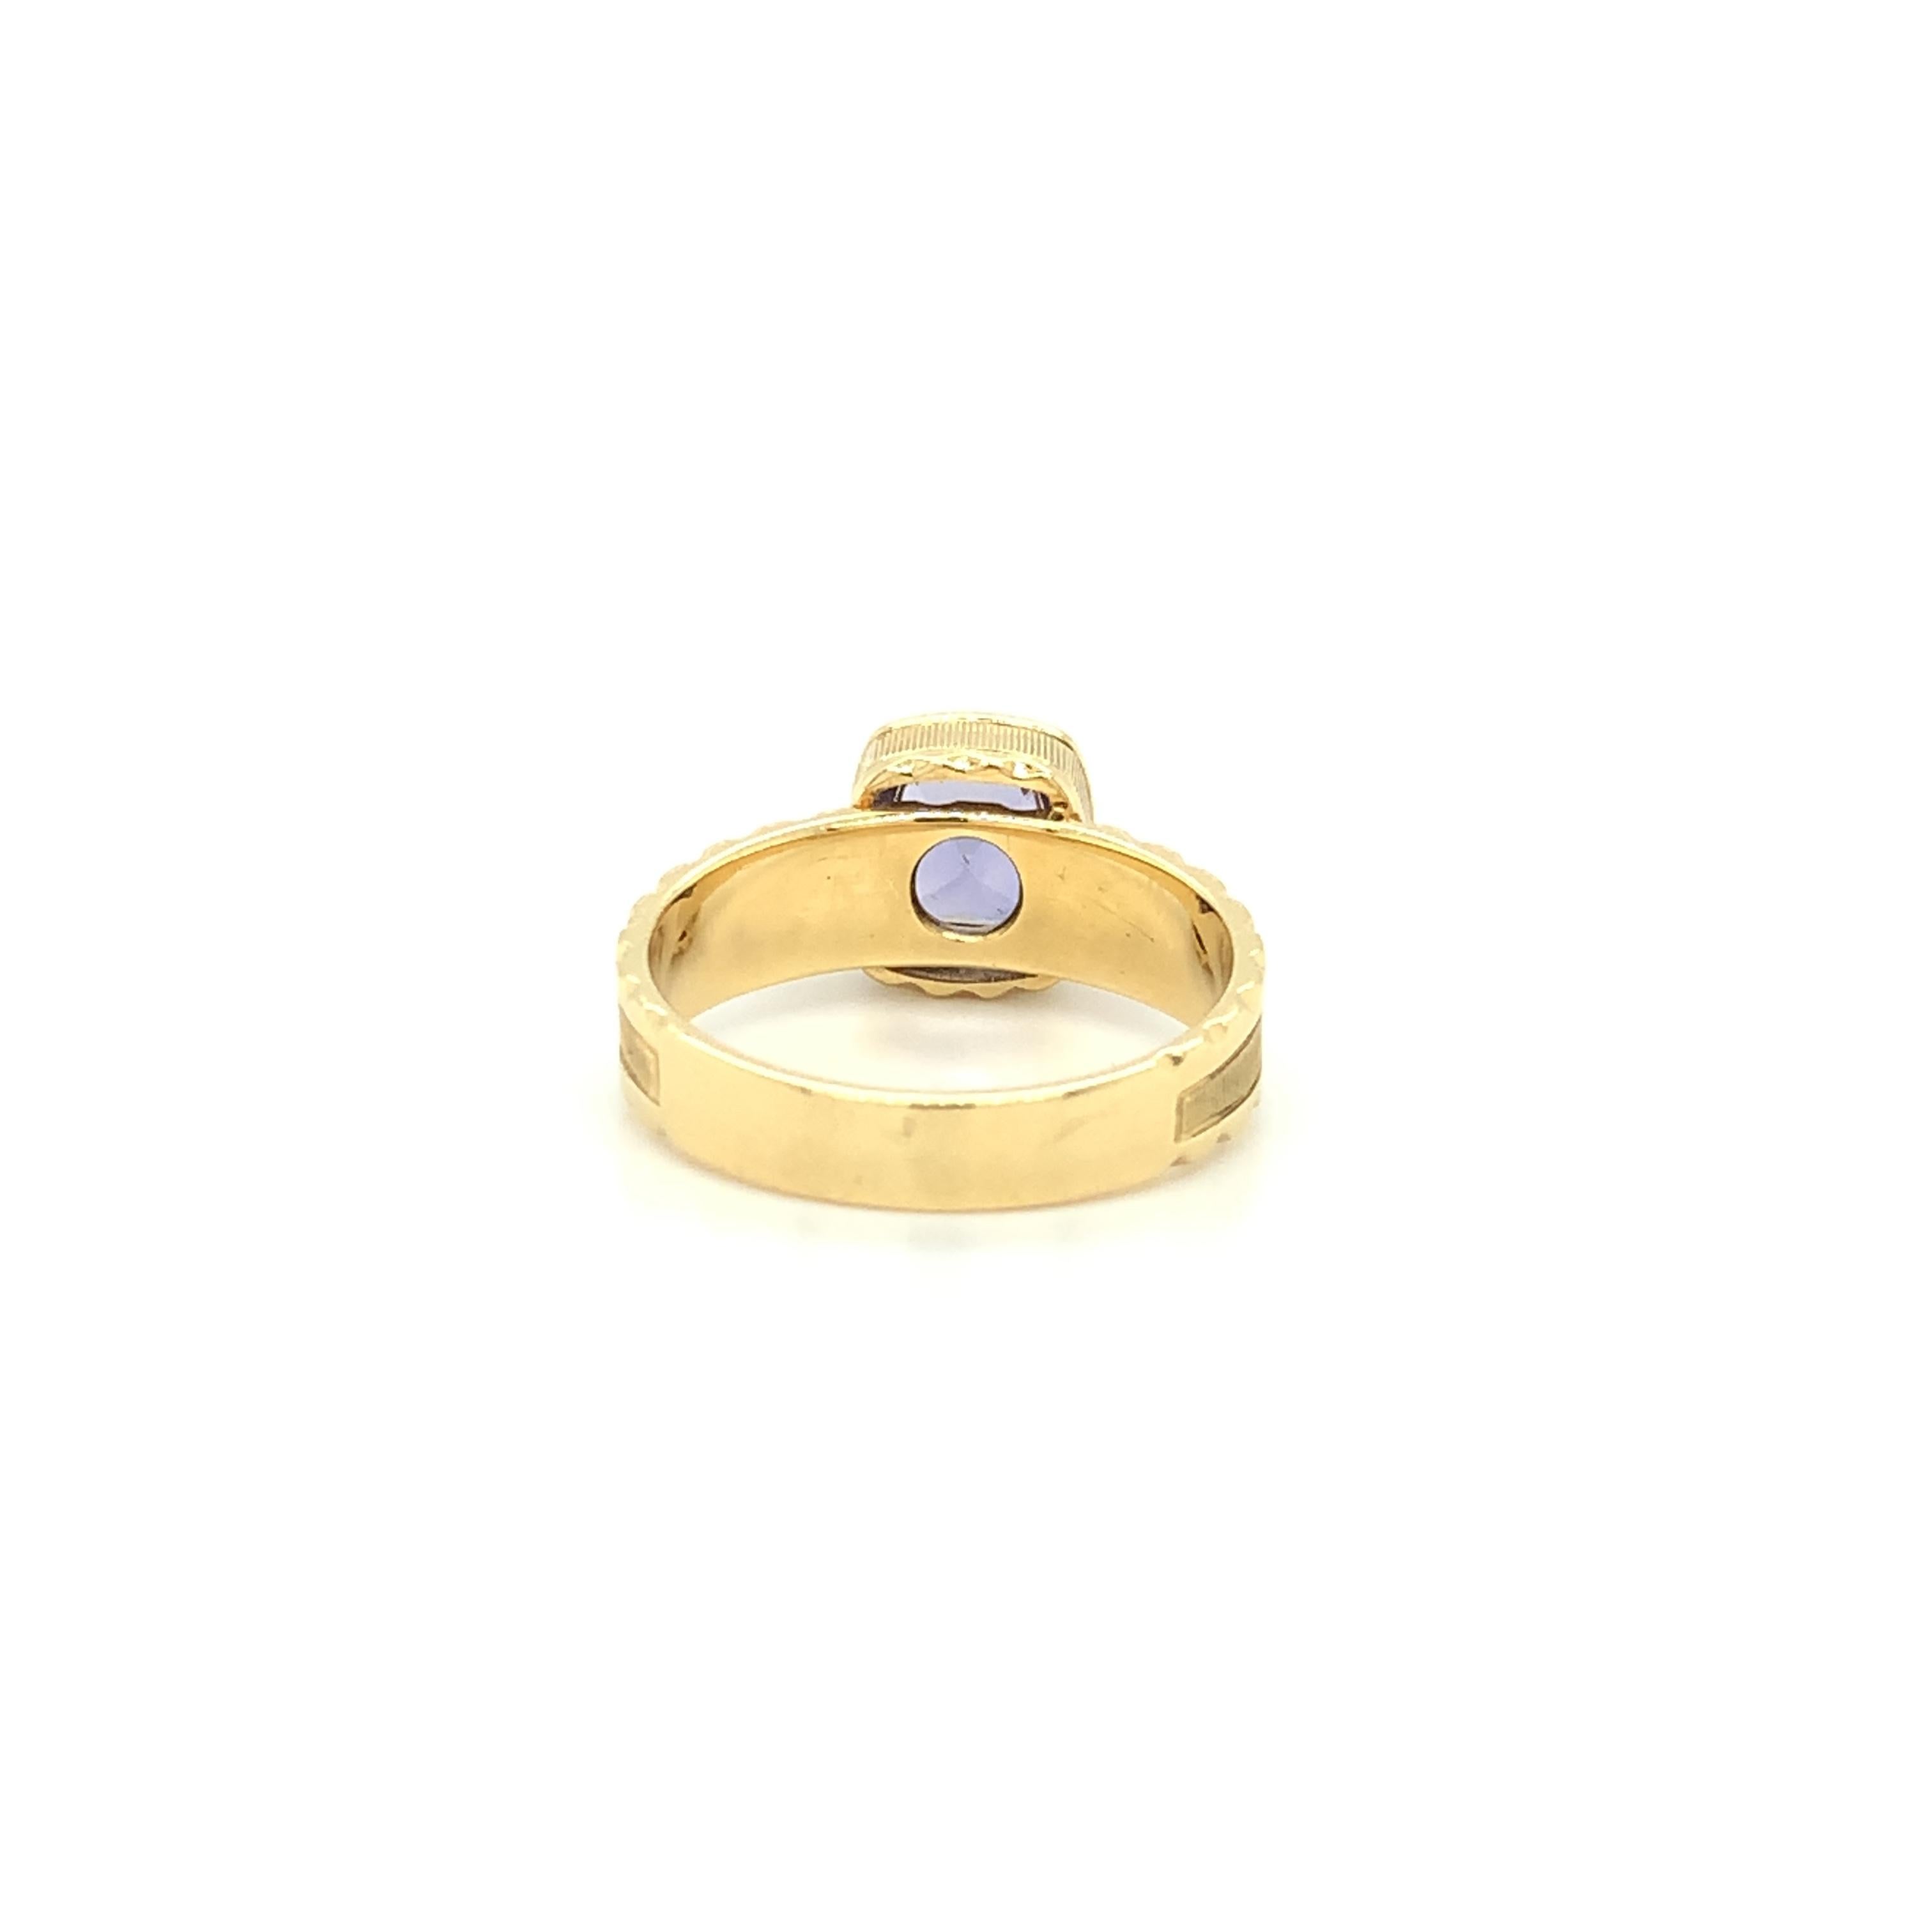 1.90 Carat Fancy Violet Sapphire and 18k Yellow Gold Handmade Ring For Sale 4